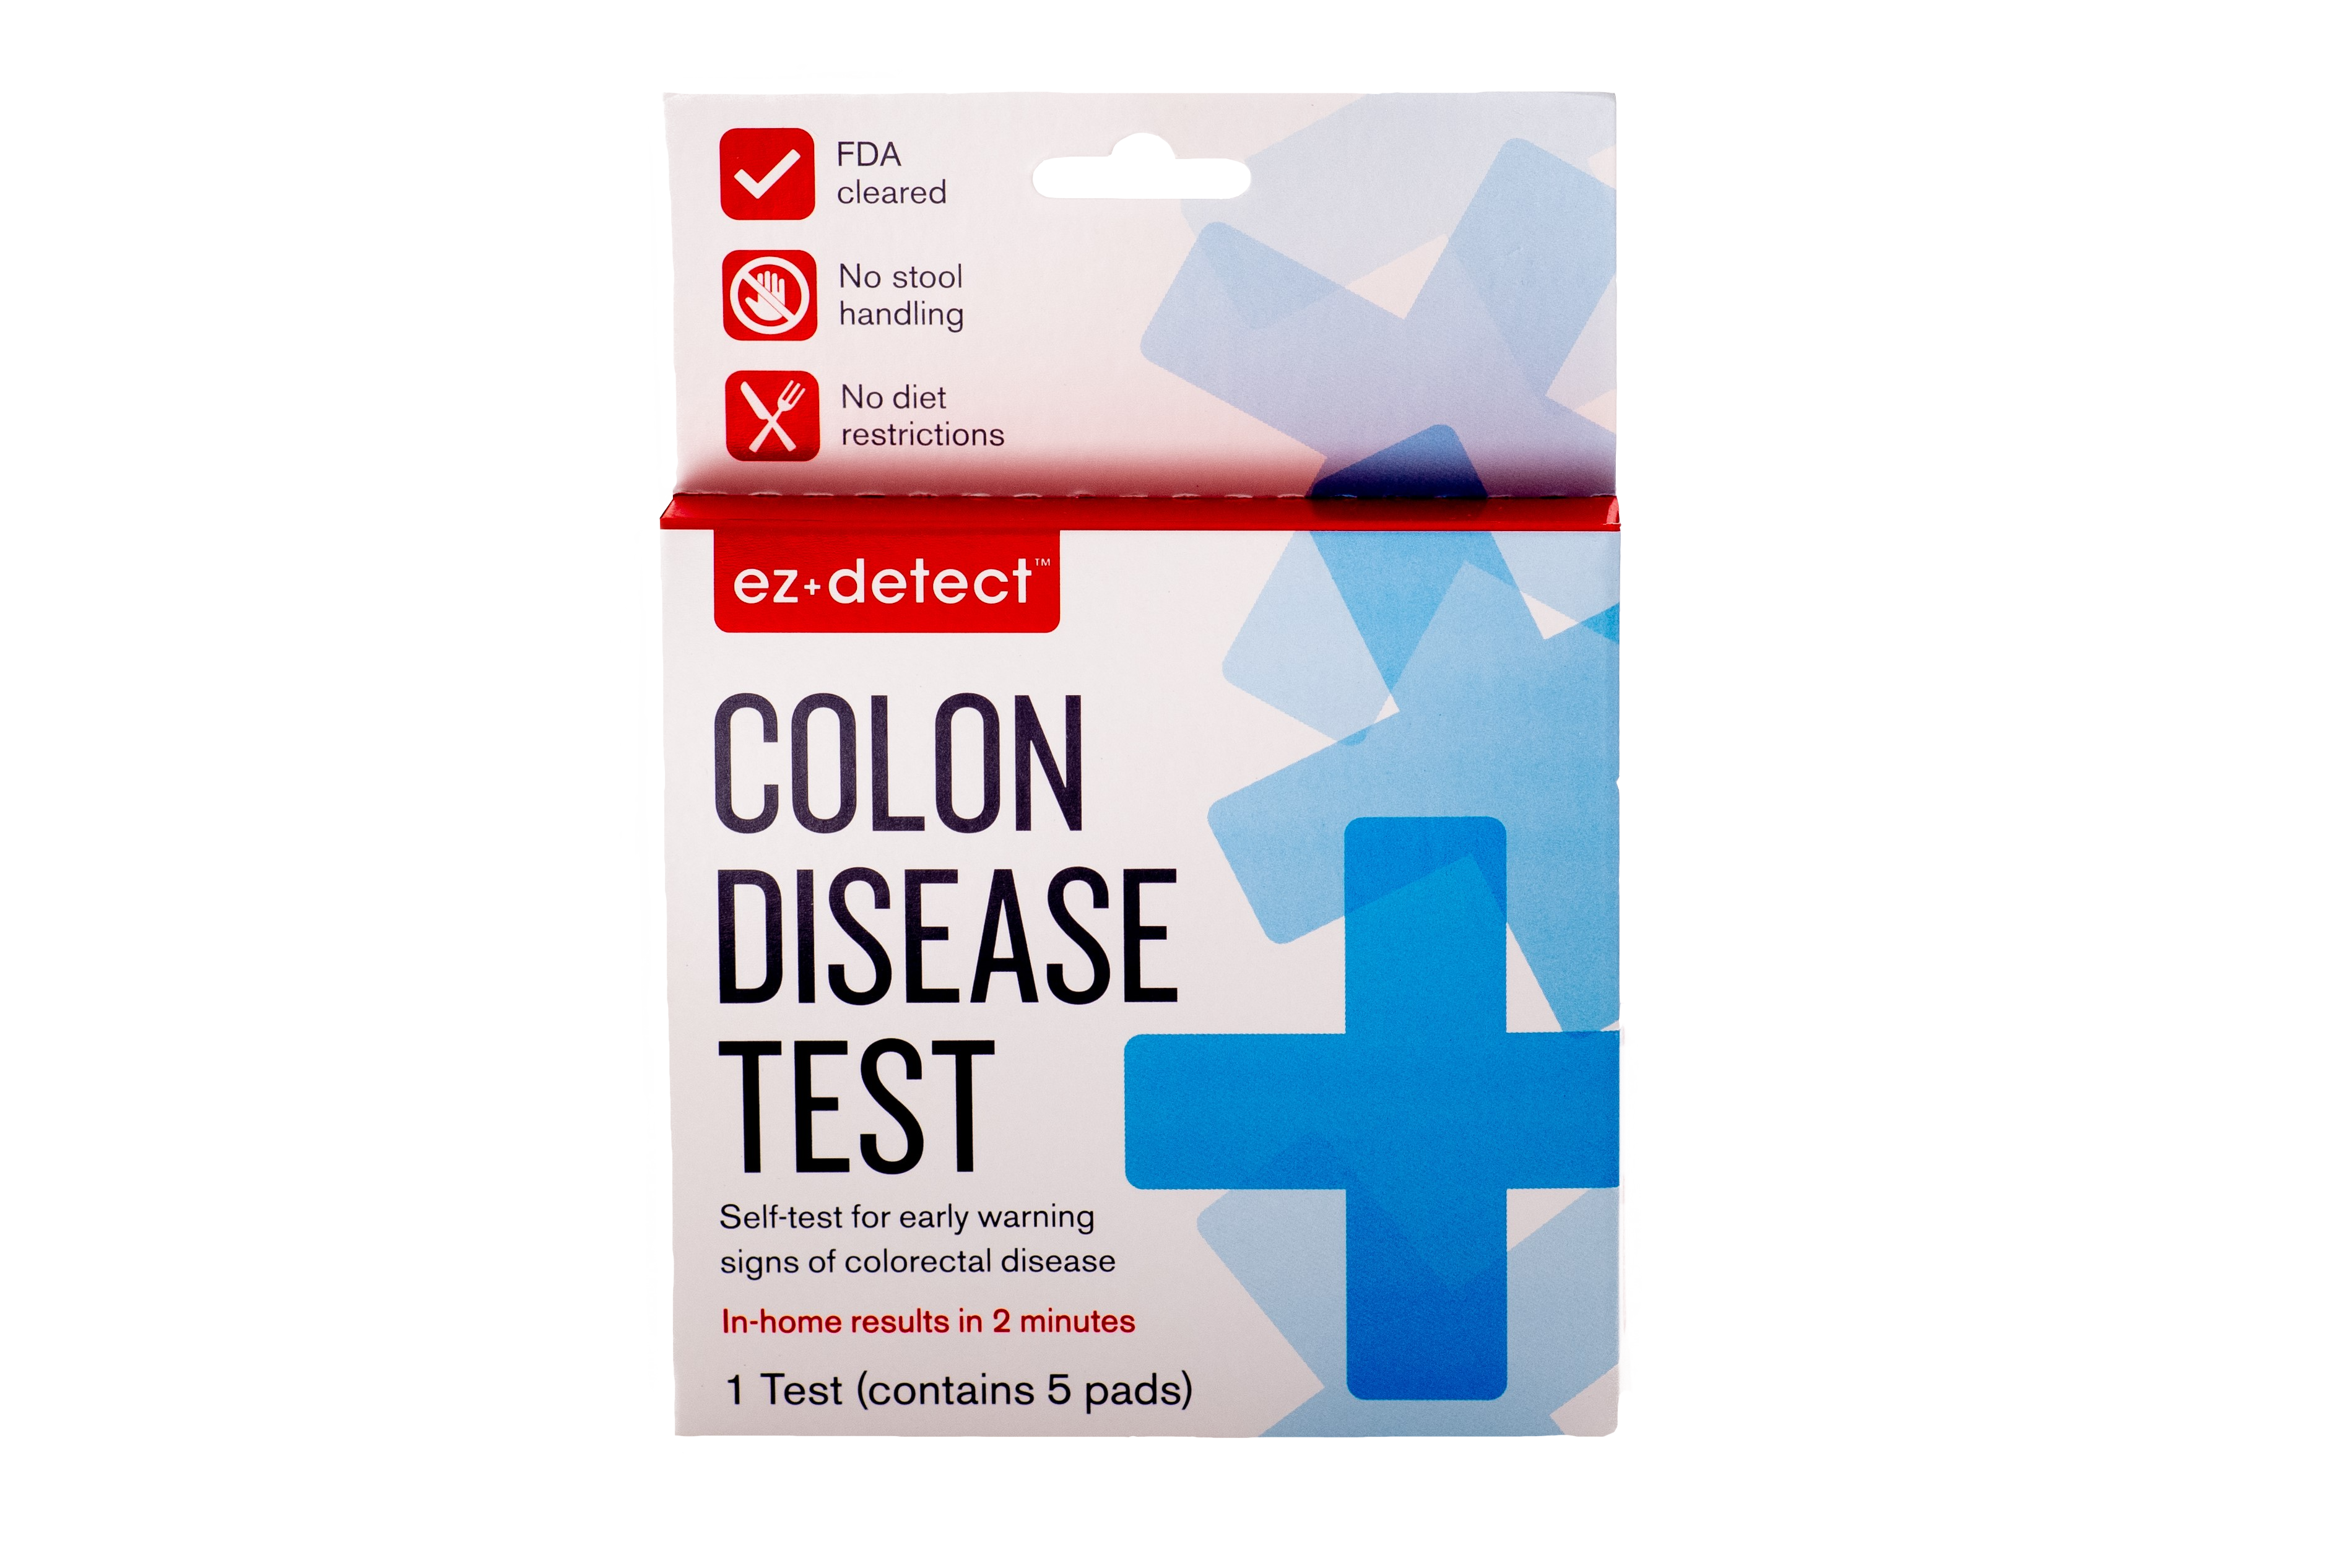 outer packaging of the EZ detect colon disease test